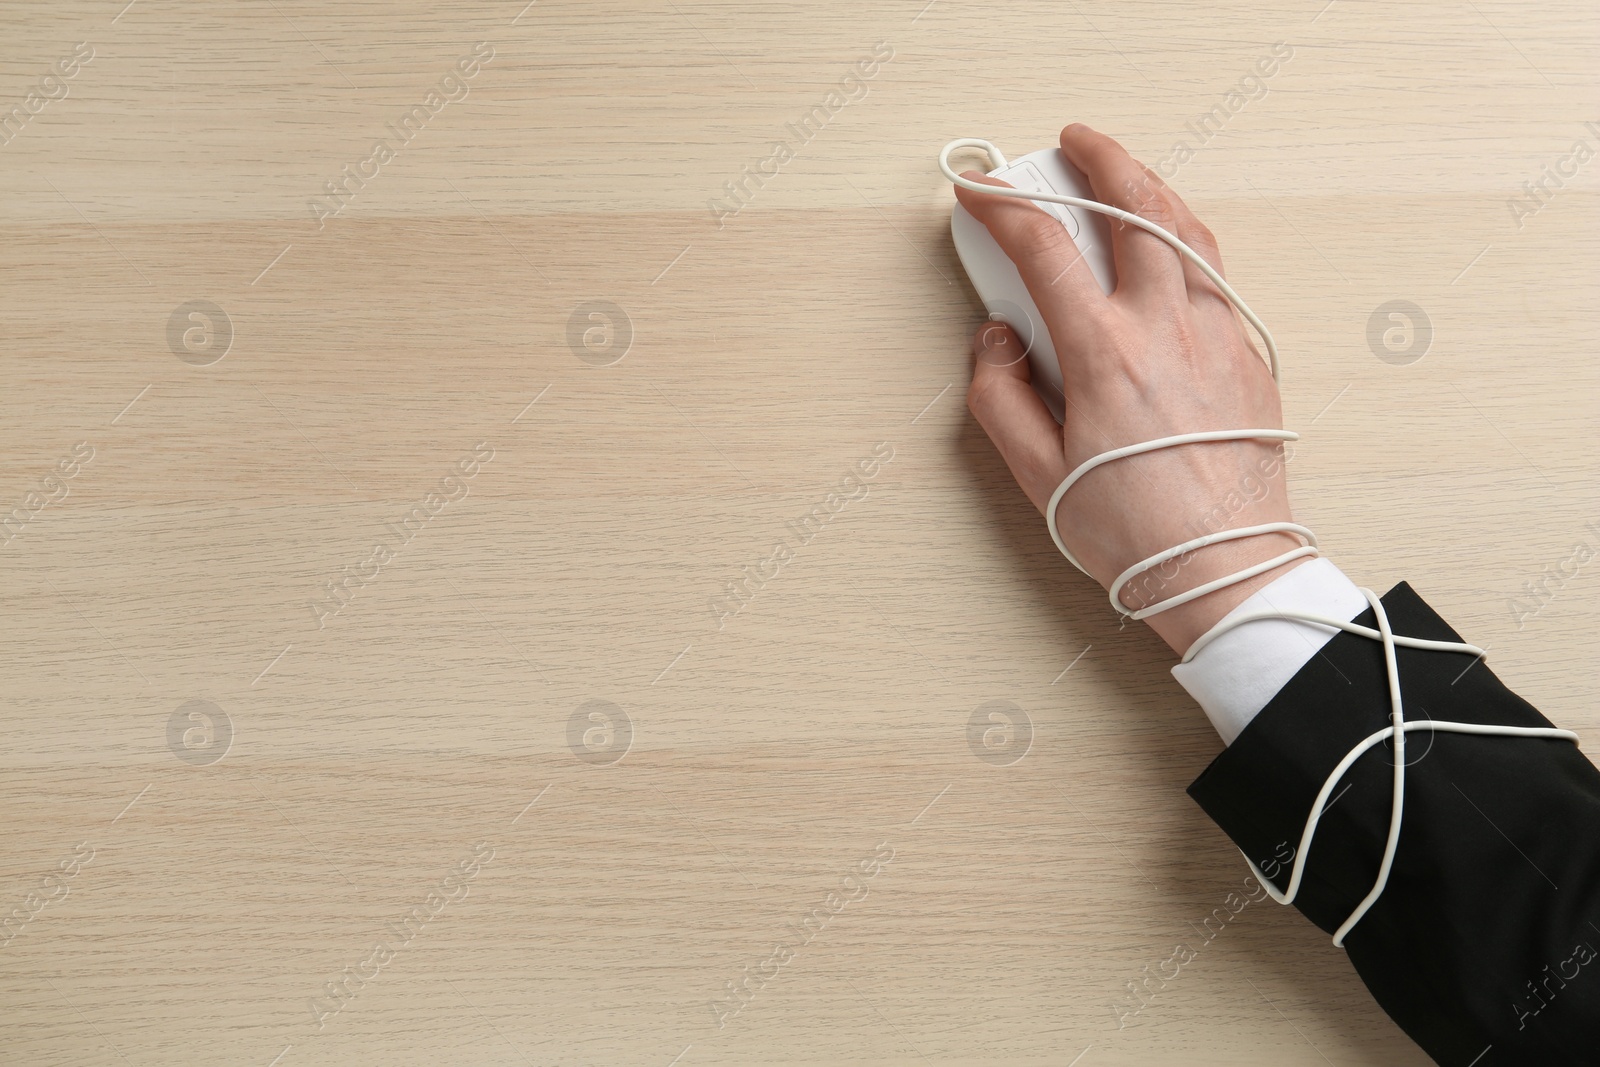 Photo of Internet addiction. Top view of man using computer mouse cable at wooden table, hand tied to device